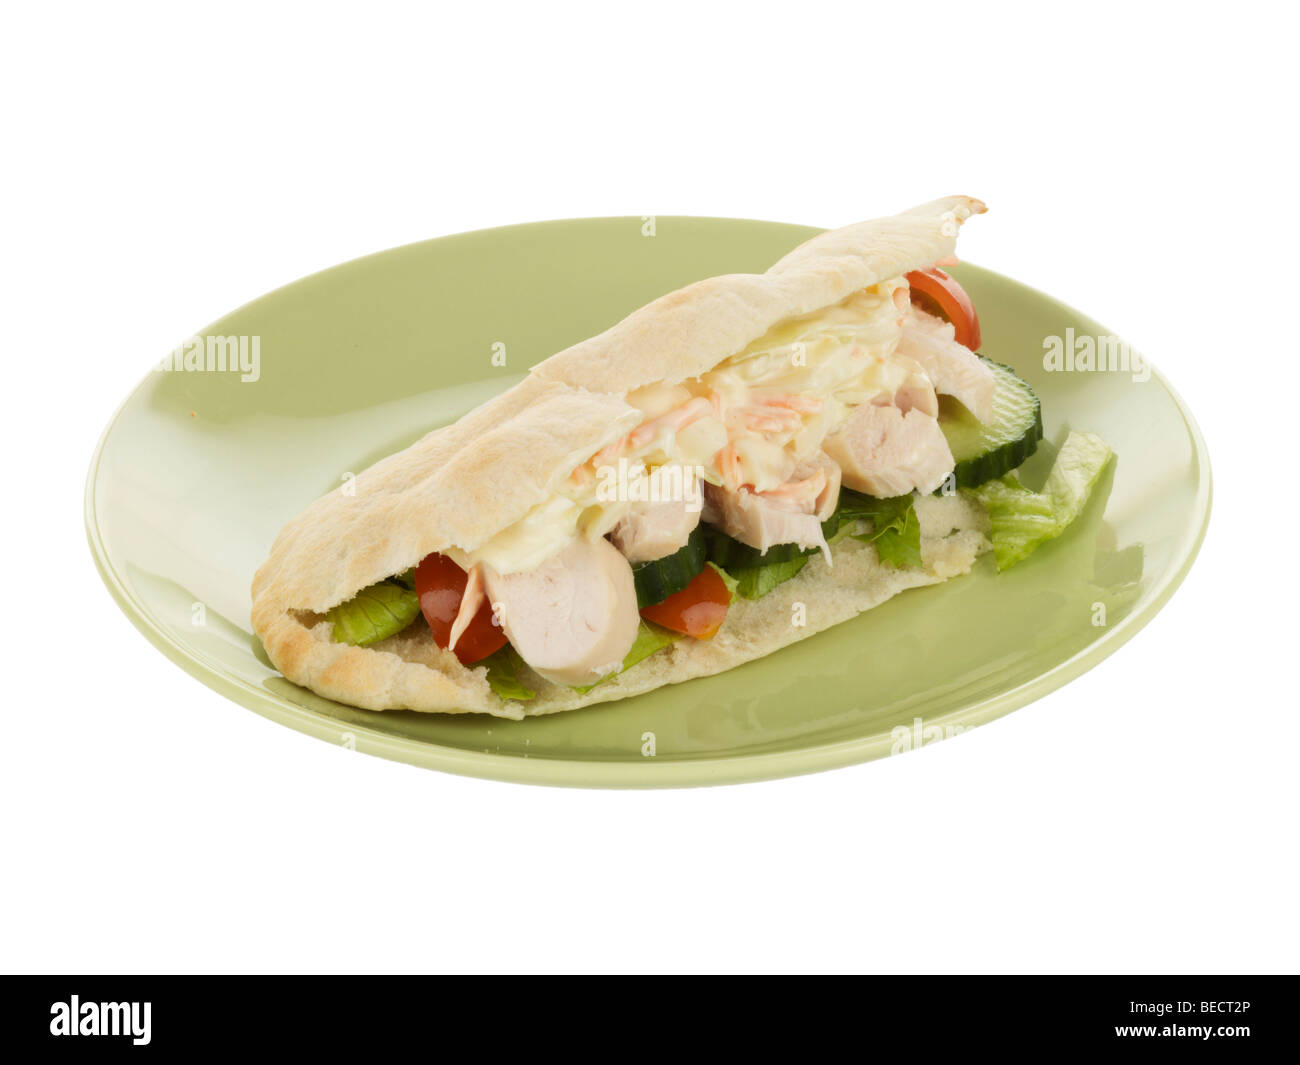 Pitta Bread with Chicken, Coleslaw and Salad Stock Photo